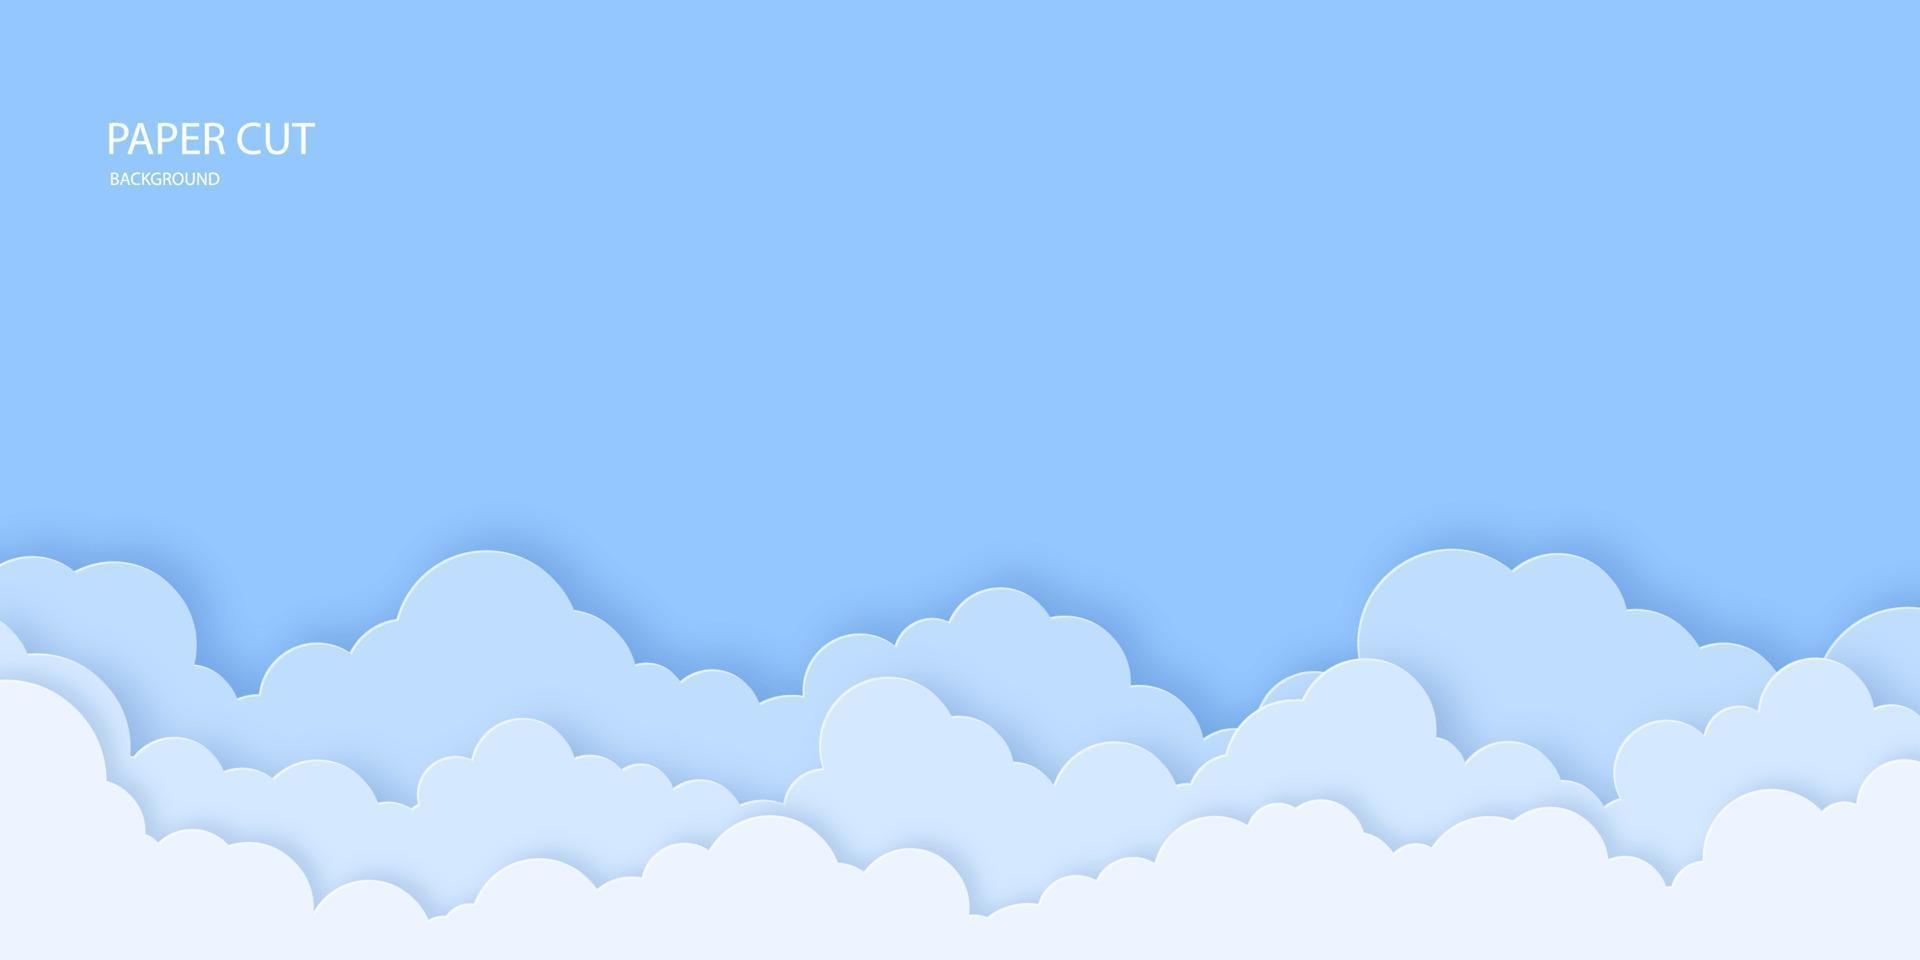 Modern paper art and craft style sky background with 3d clouds. vector